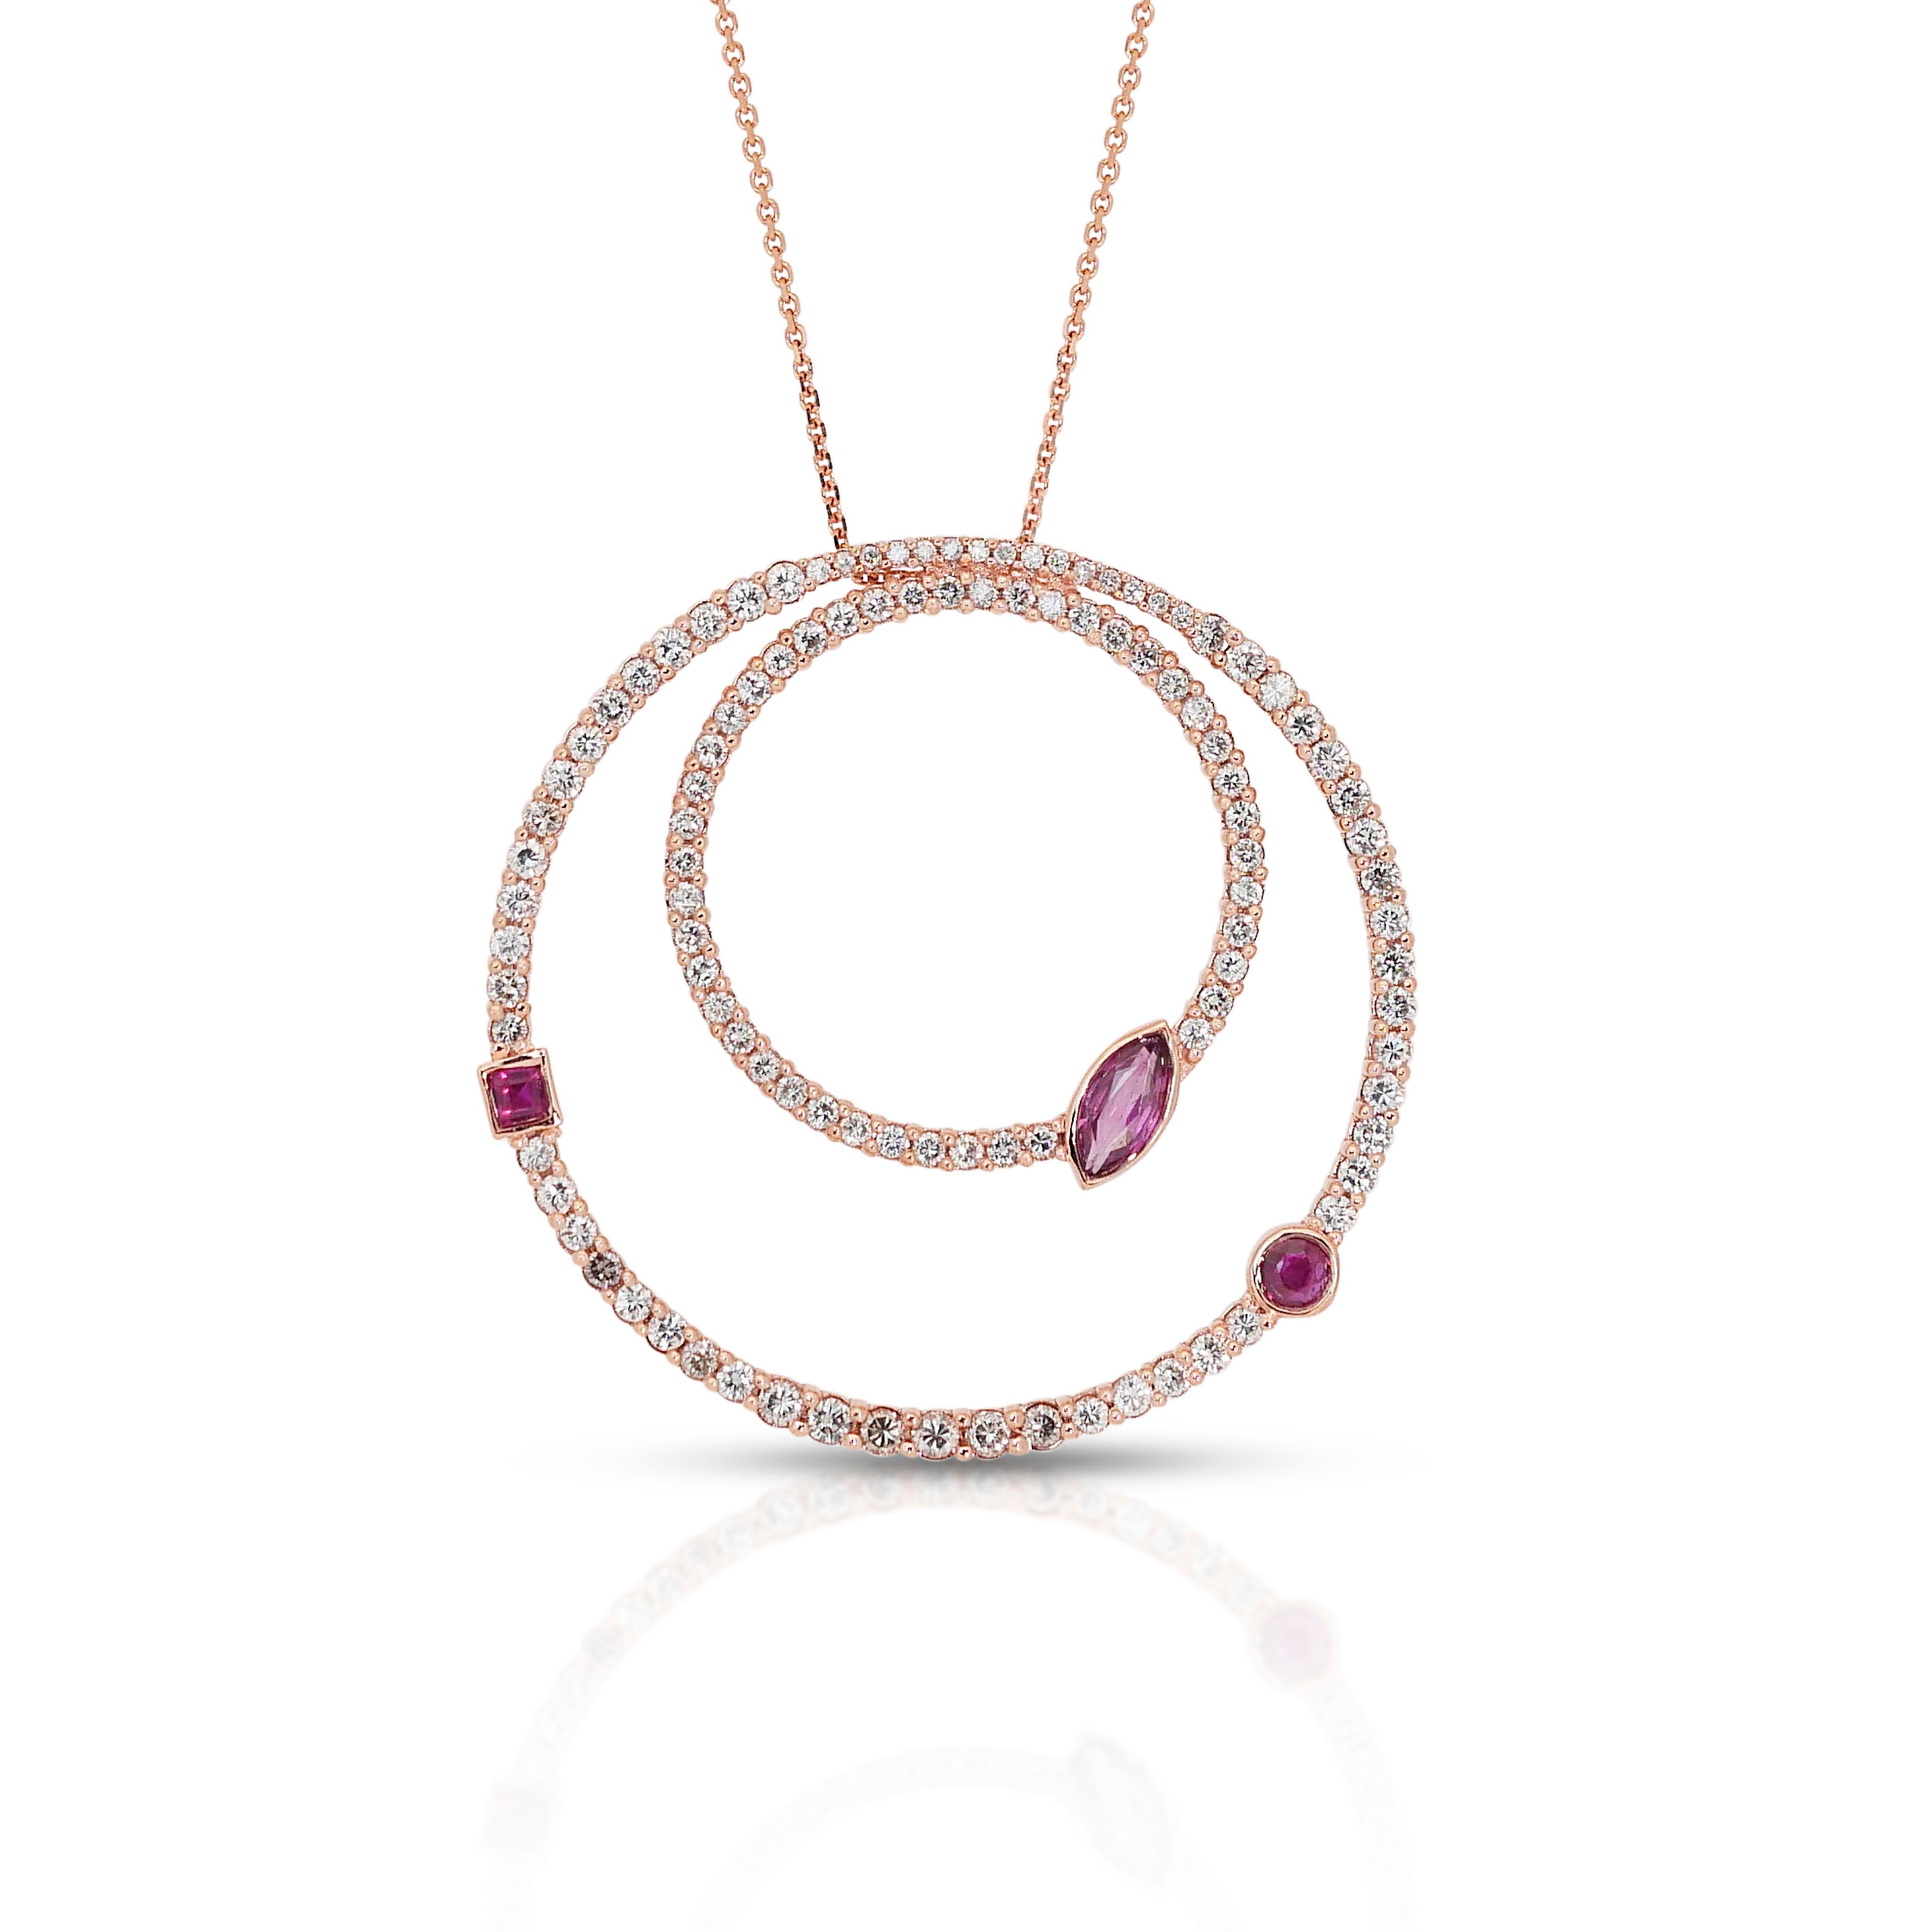 Regal 18k Rose Gold Ruby and Diamond Necklace w/1.70 ct - IGI Certified

This 18k rose gold necklace exudes regal elegance, featuring a central marquise ruby of 0.21 carat, radiating a rich purple-red hue. This exquisite ruby is framed by a dazzling